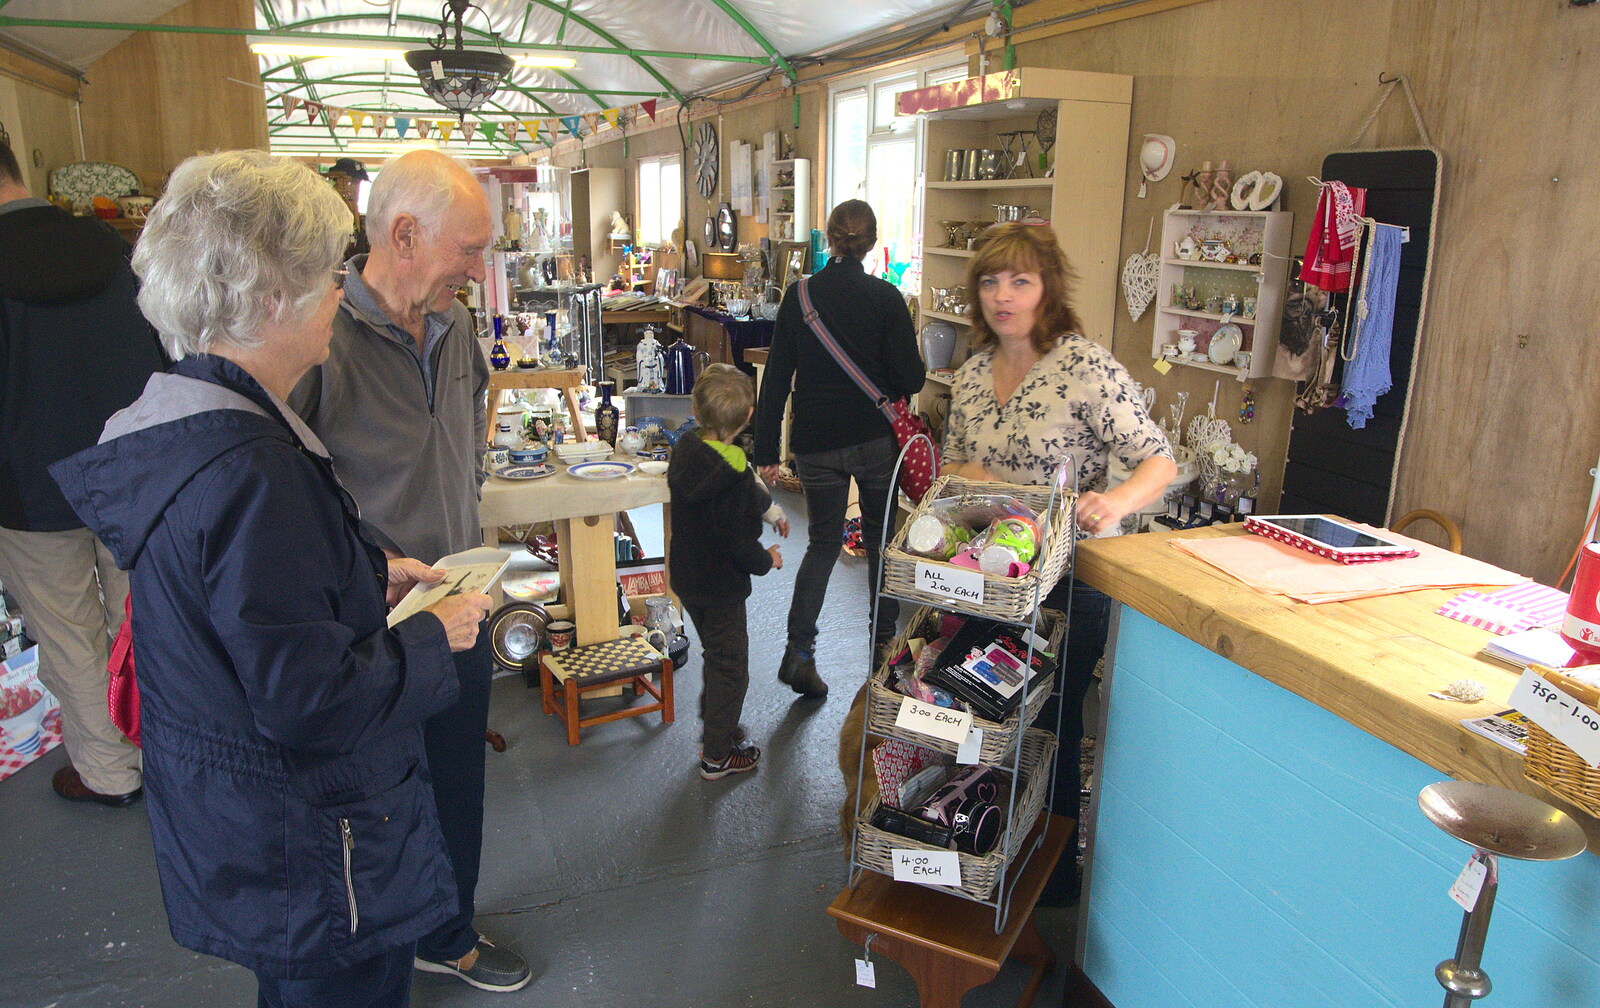 Michelle in her shop from Camping at Roundhills, Brockenhurst, New Forest, Hampshire - 29th August 2015